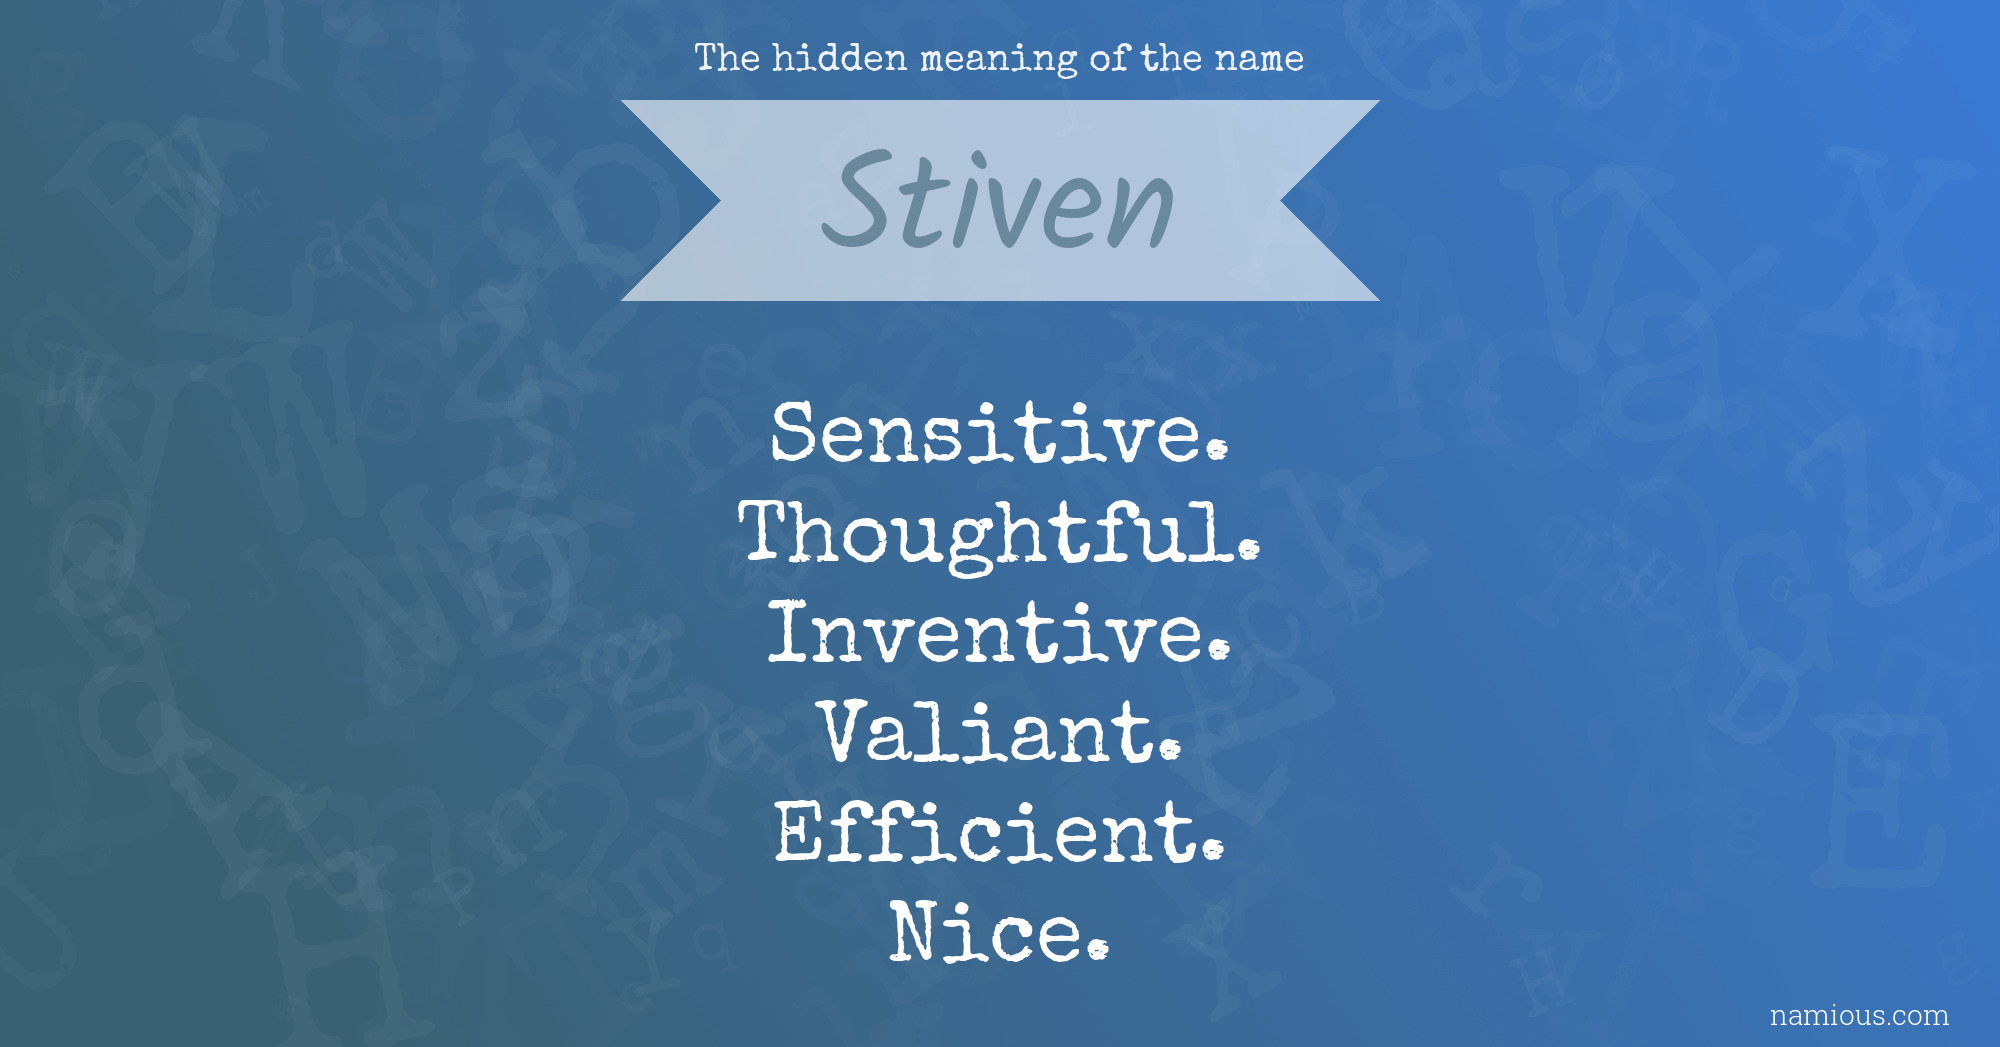 The hidden meaning of the name Stiven